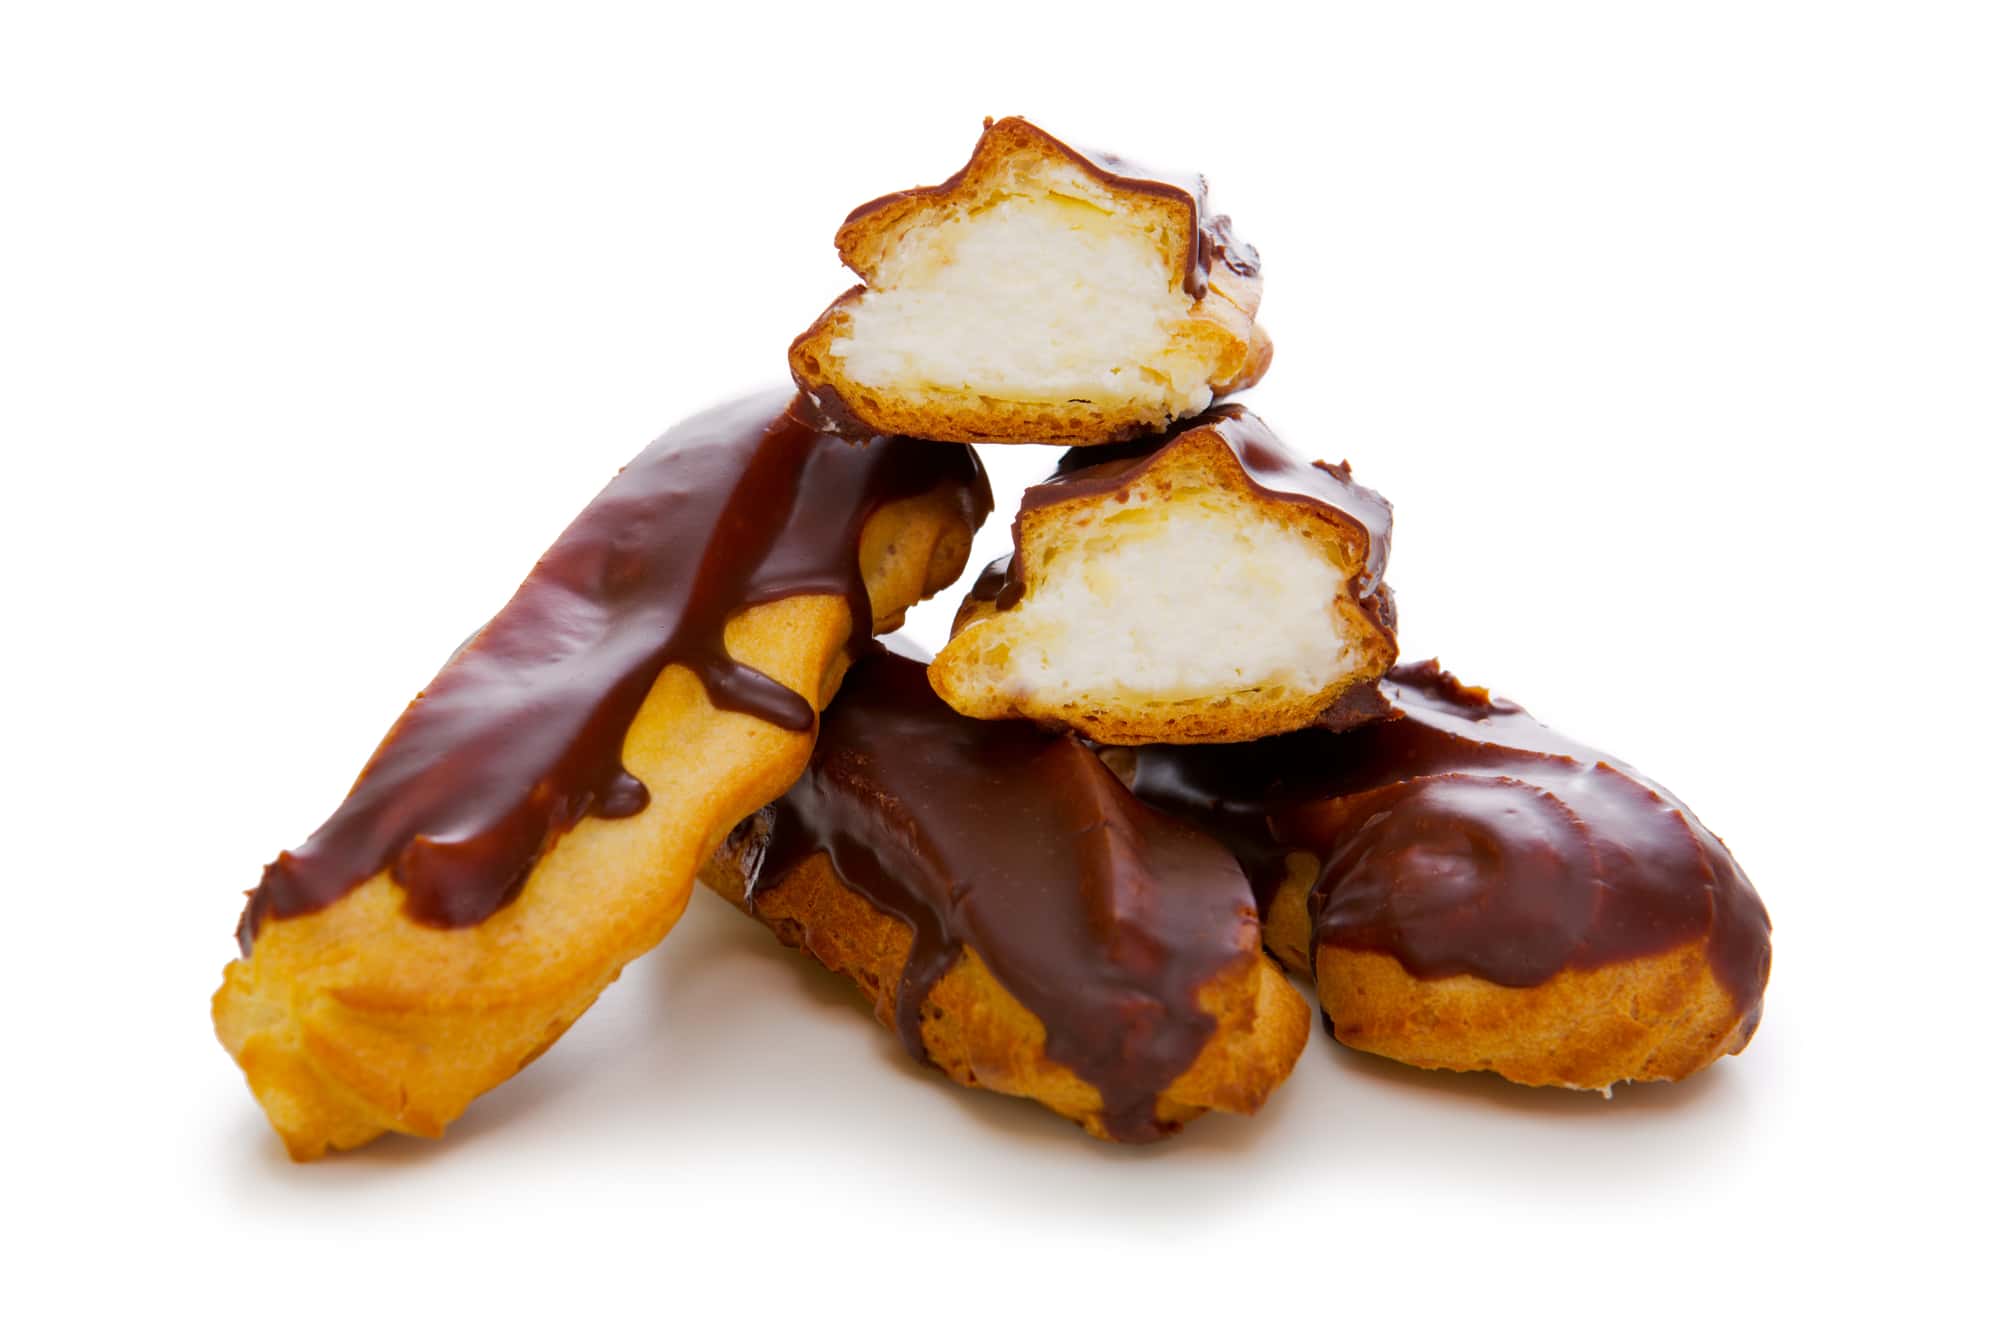 A pile of chocolate covered eclairs on a white background.